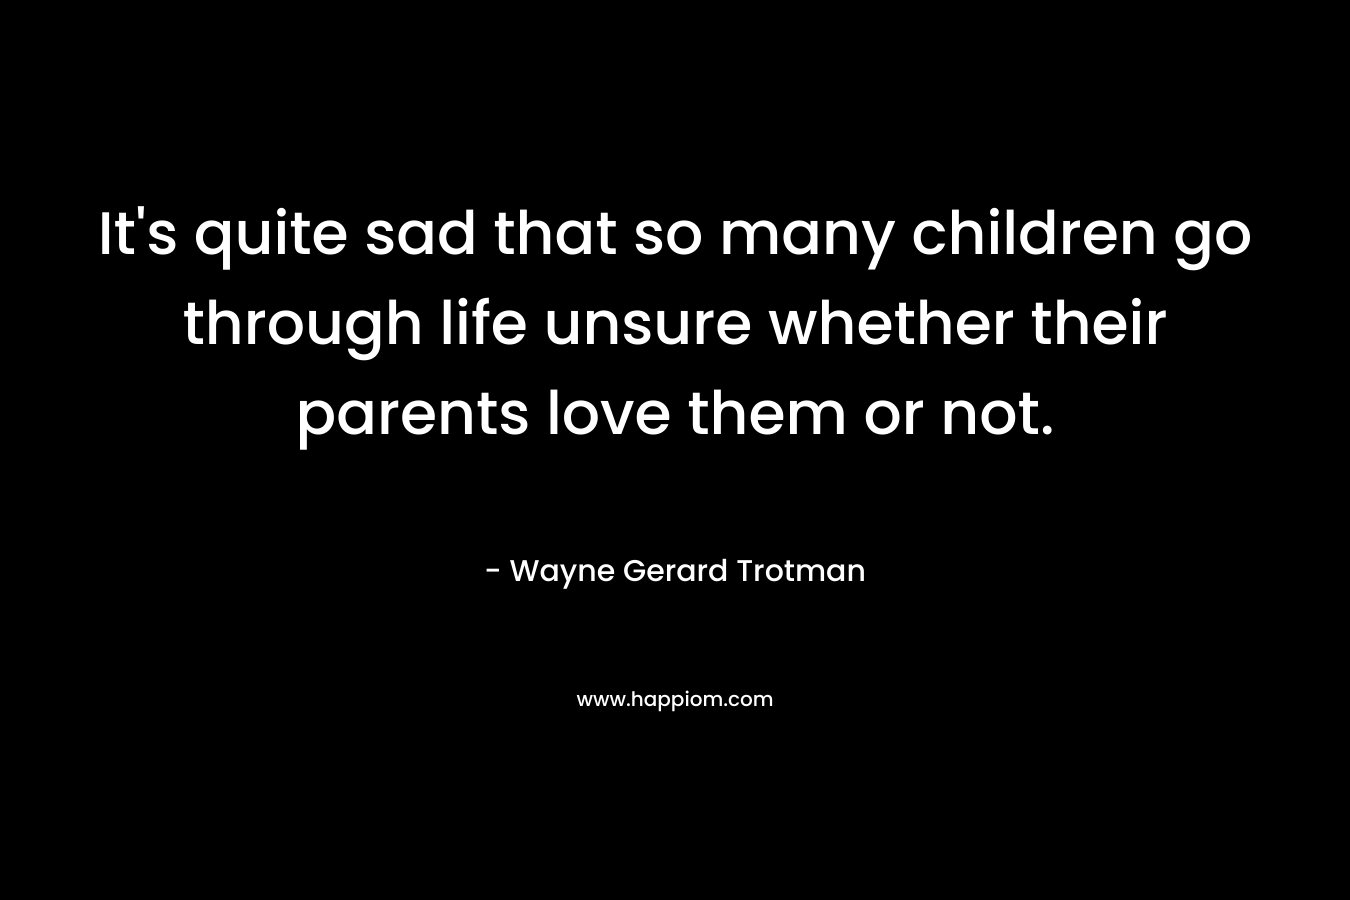 It’s quite sad that so many children go through life unsure whether their parents love them or not. – Wayne Gerard Trotman